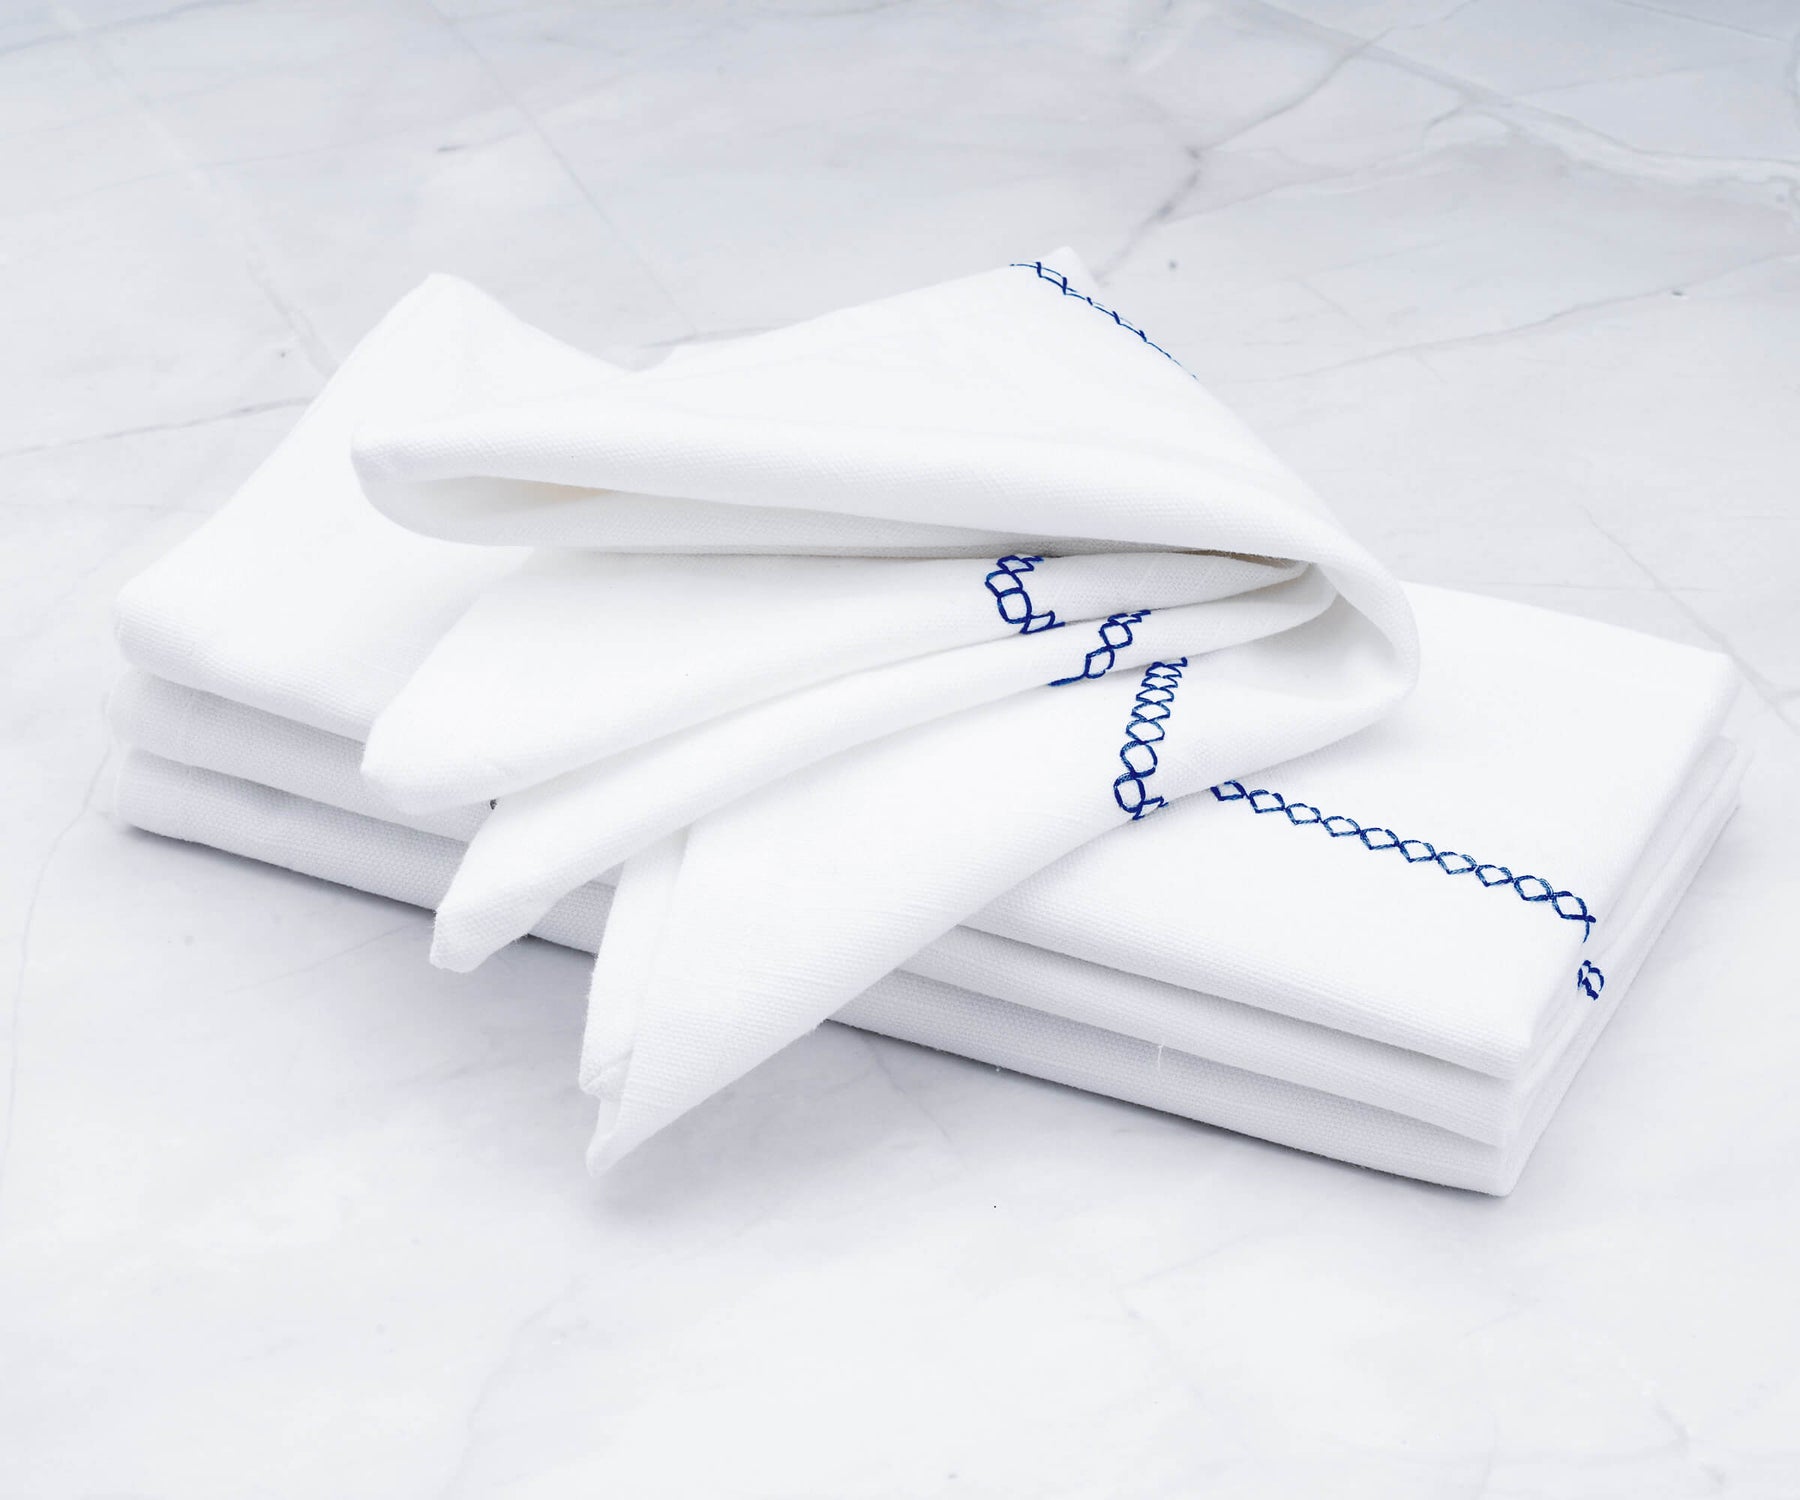 There are cloth dinner napkins, Vanity Fair dinner napkins, neatly folded dinner napkins, white cotton napkins, and instructions on how to fold napkins for dinner.